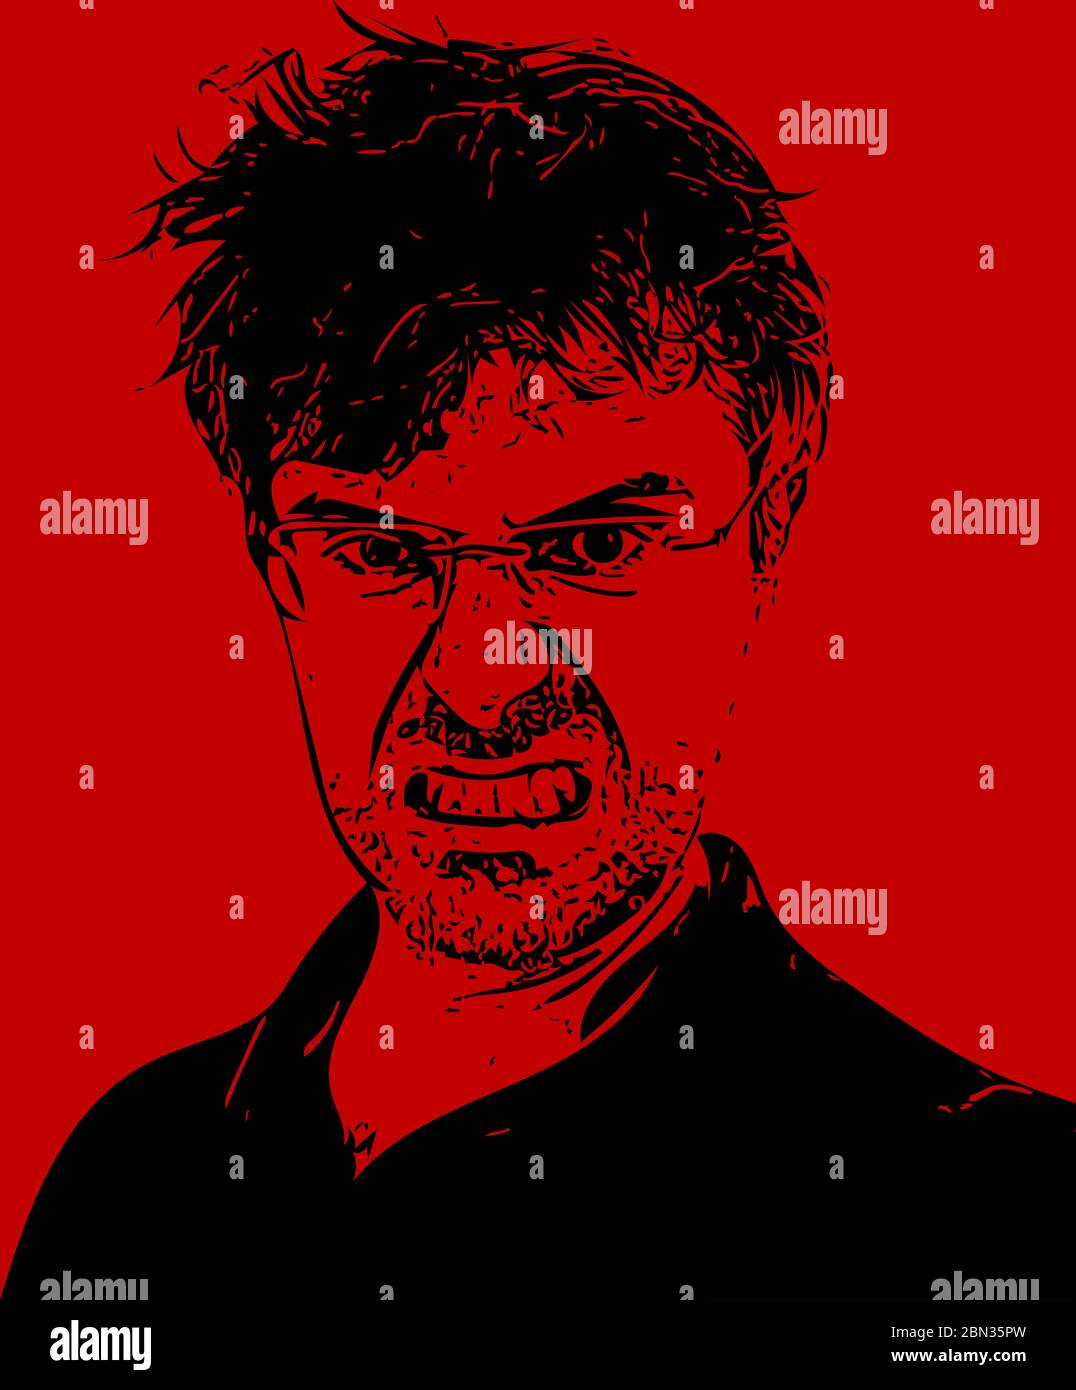 Creepy illustration of angry man with mental disorder. concept of difficulty controlling anger. Black lines on red background Stock Photo